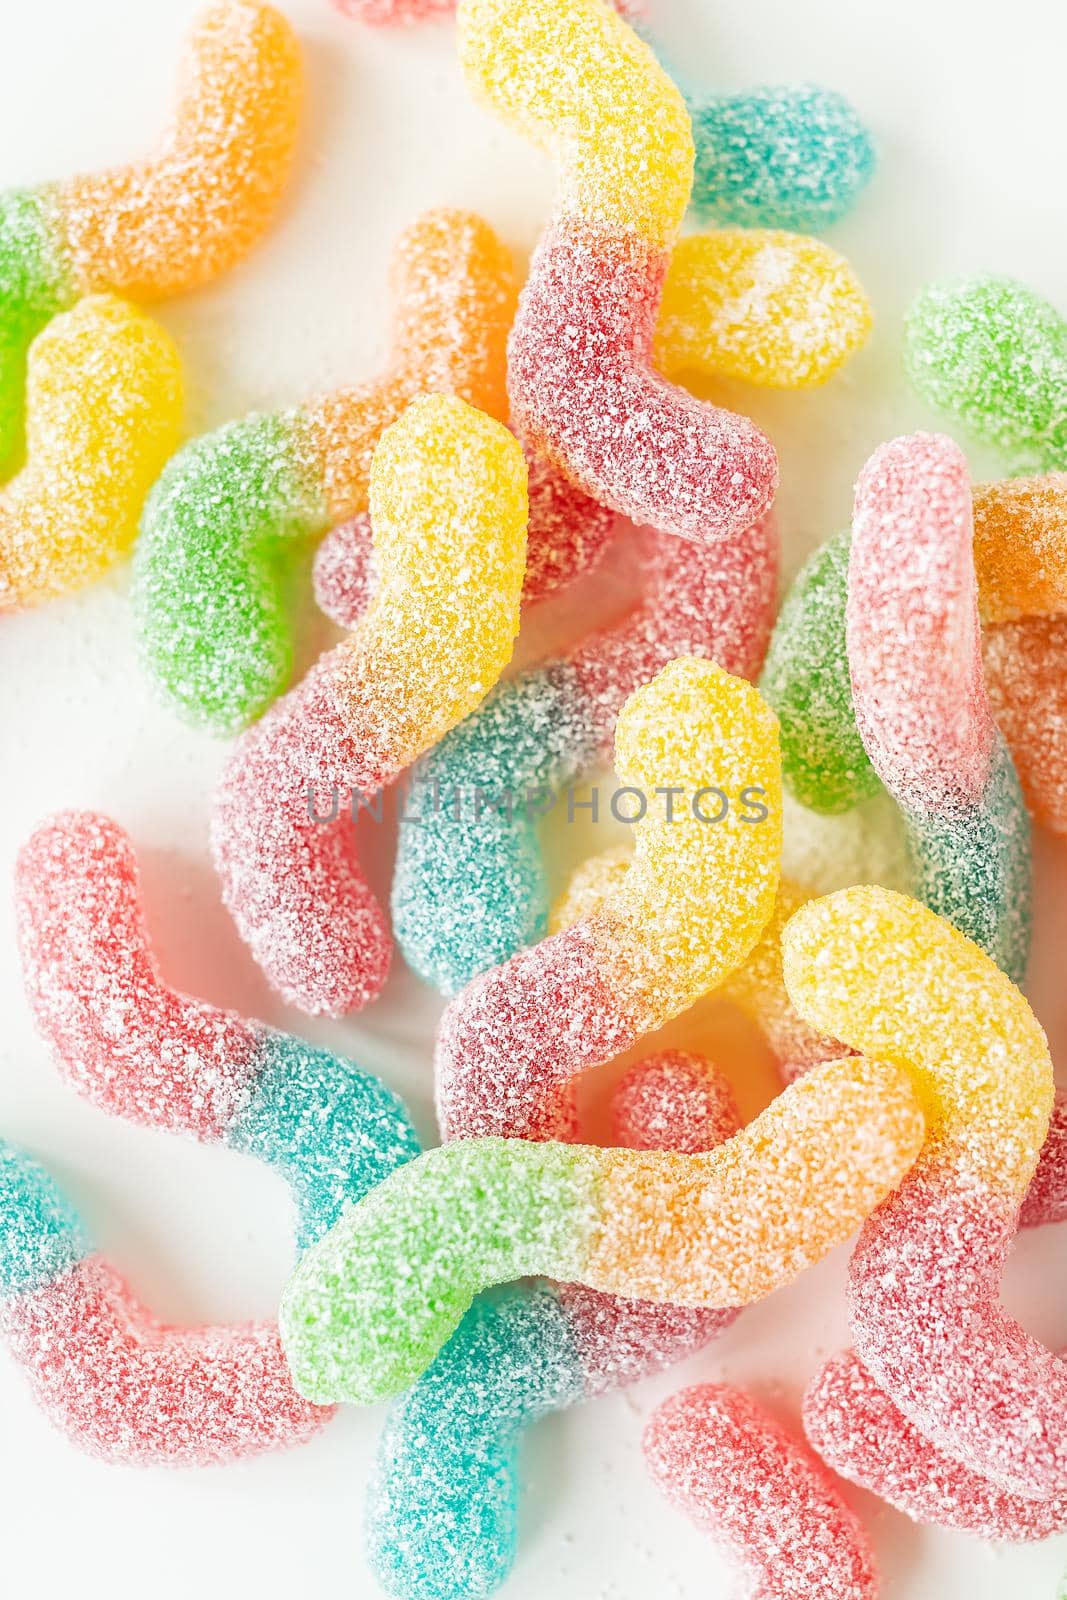 Colorful tasty jelly candies on a white background, top view. Vertical photo. by sfinks